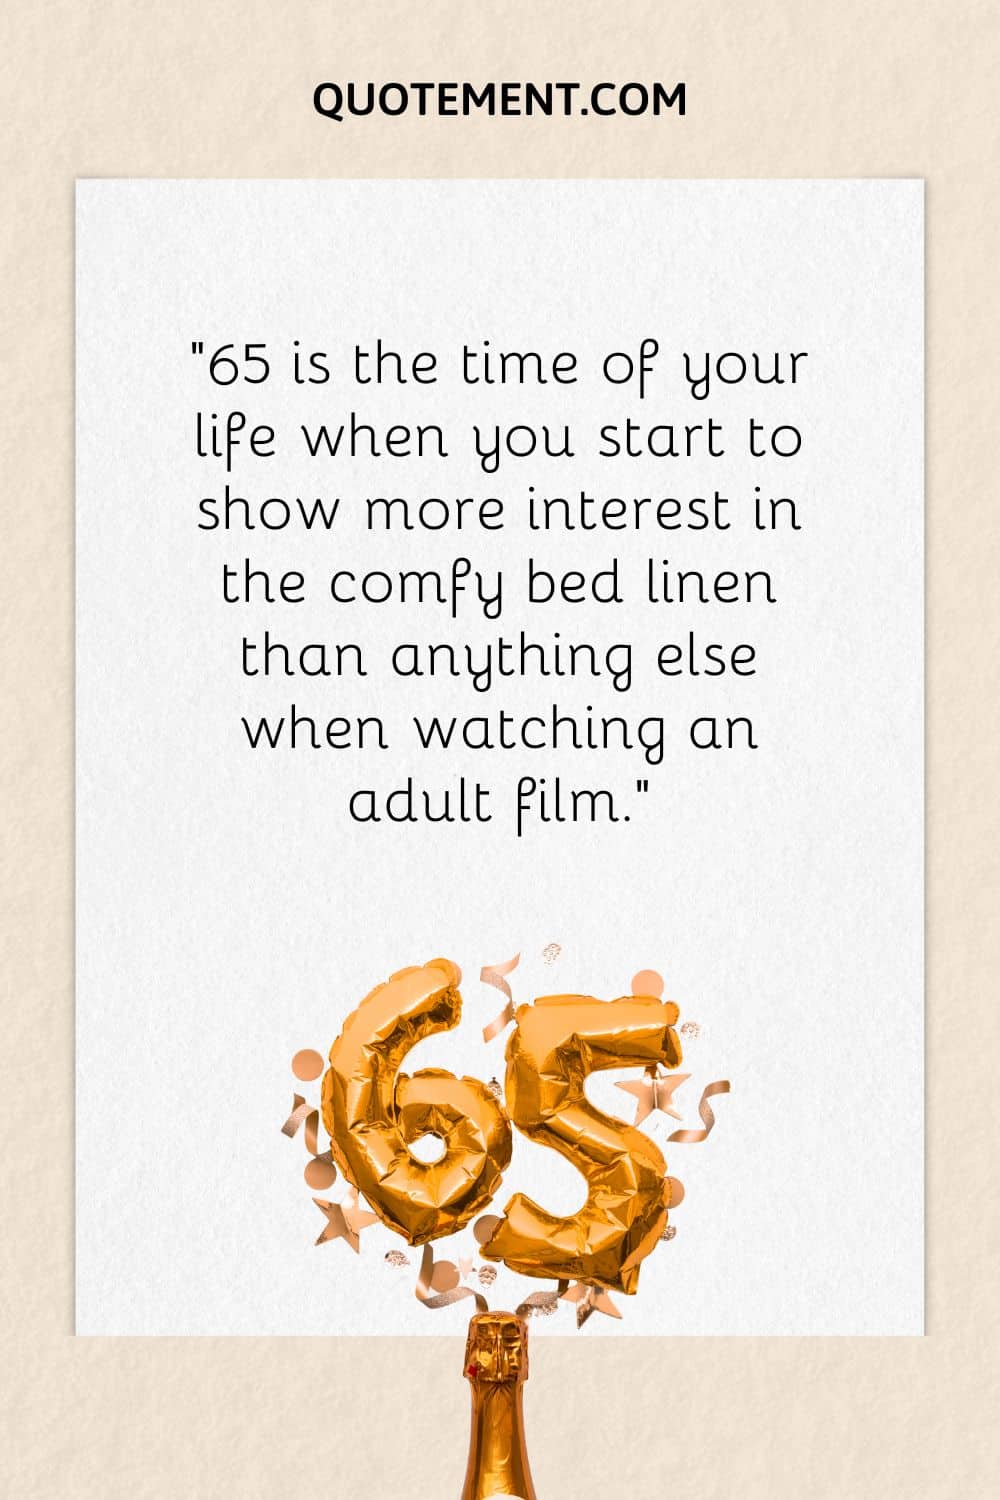 “65 is the time of your life when you start to show more interest in the comfy bed linen than anything else when watching an adult film.”